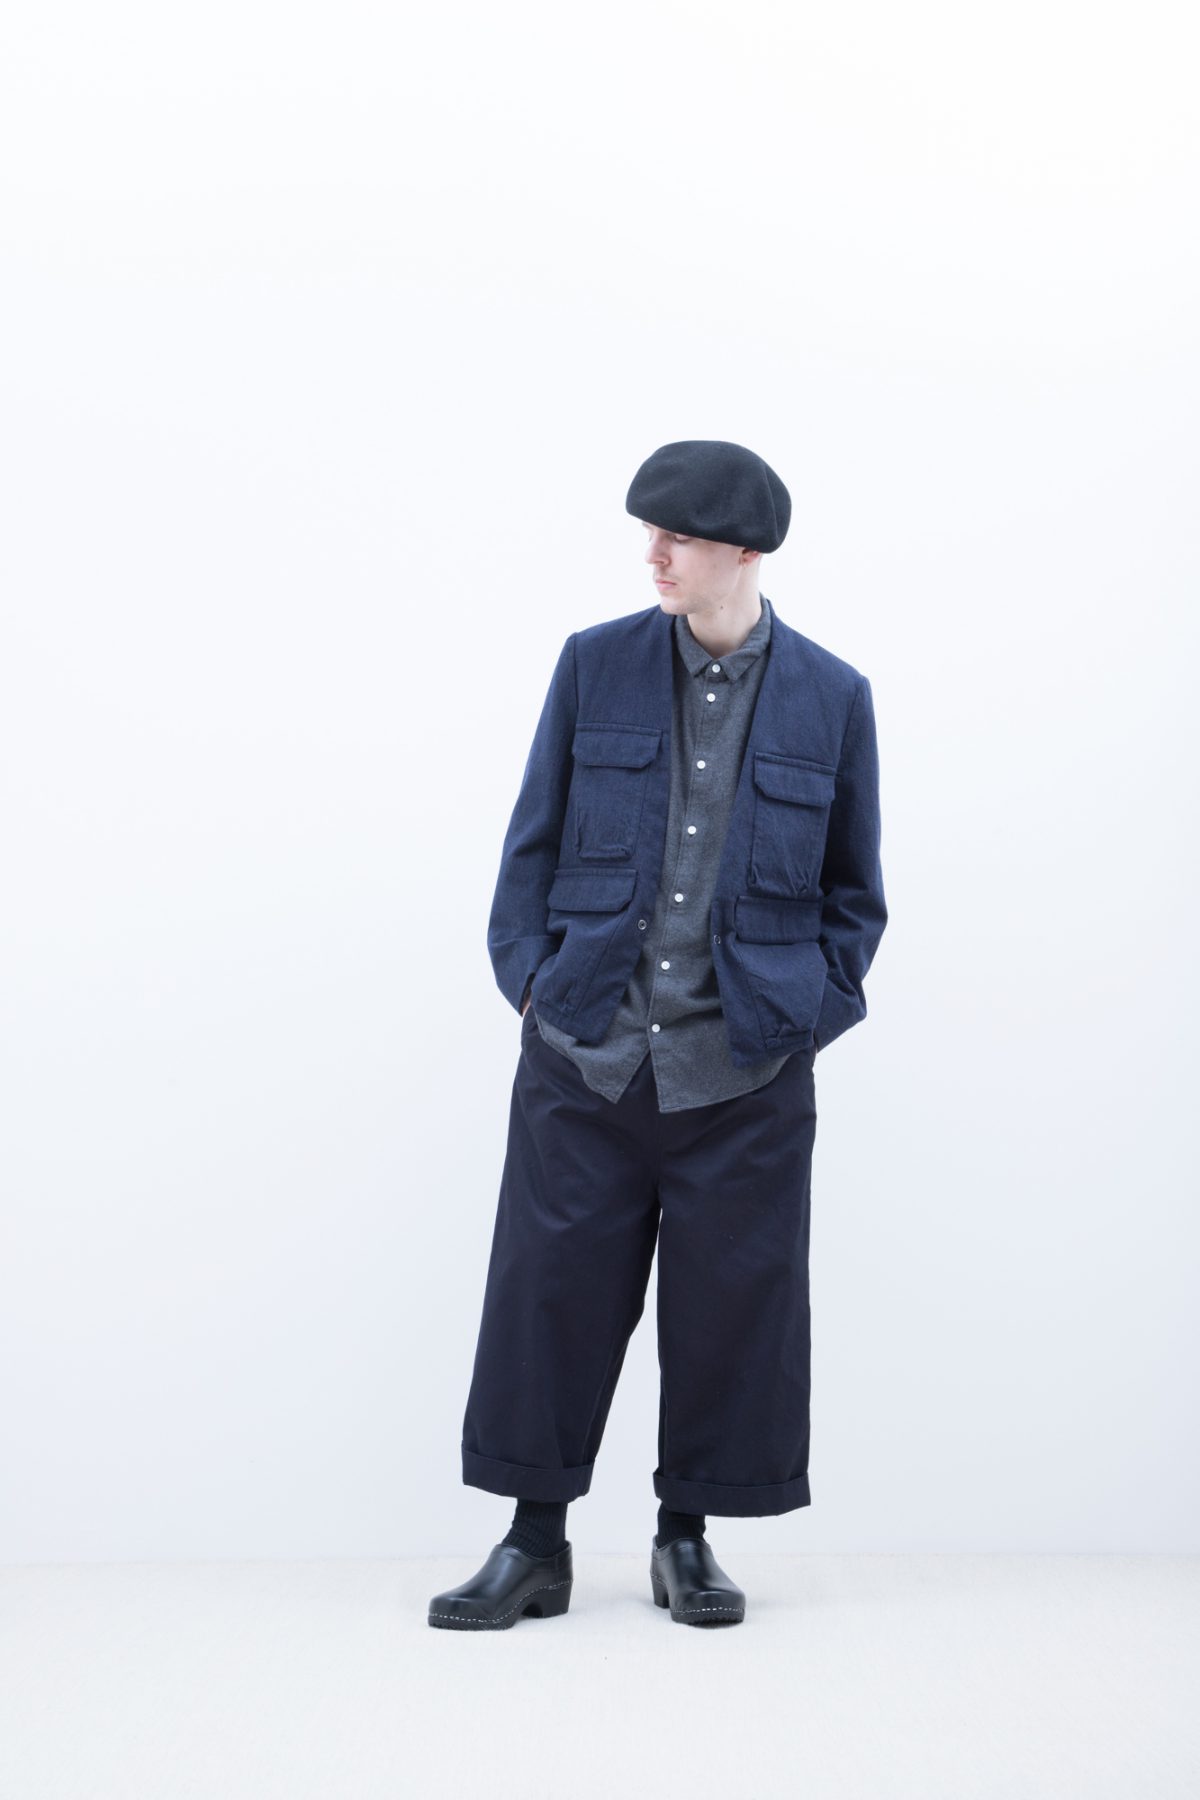 No. 051 | 2018 AW MENS | LOOK | FIRMUM